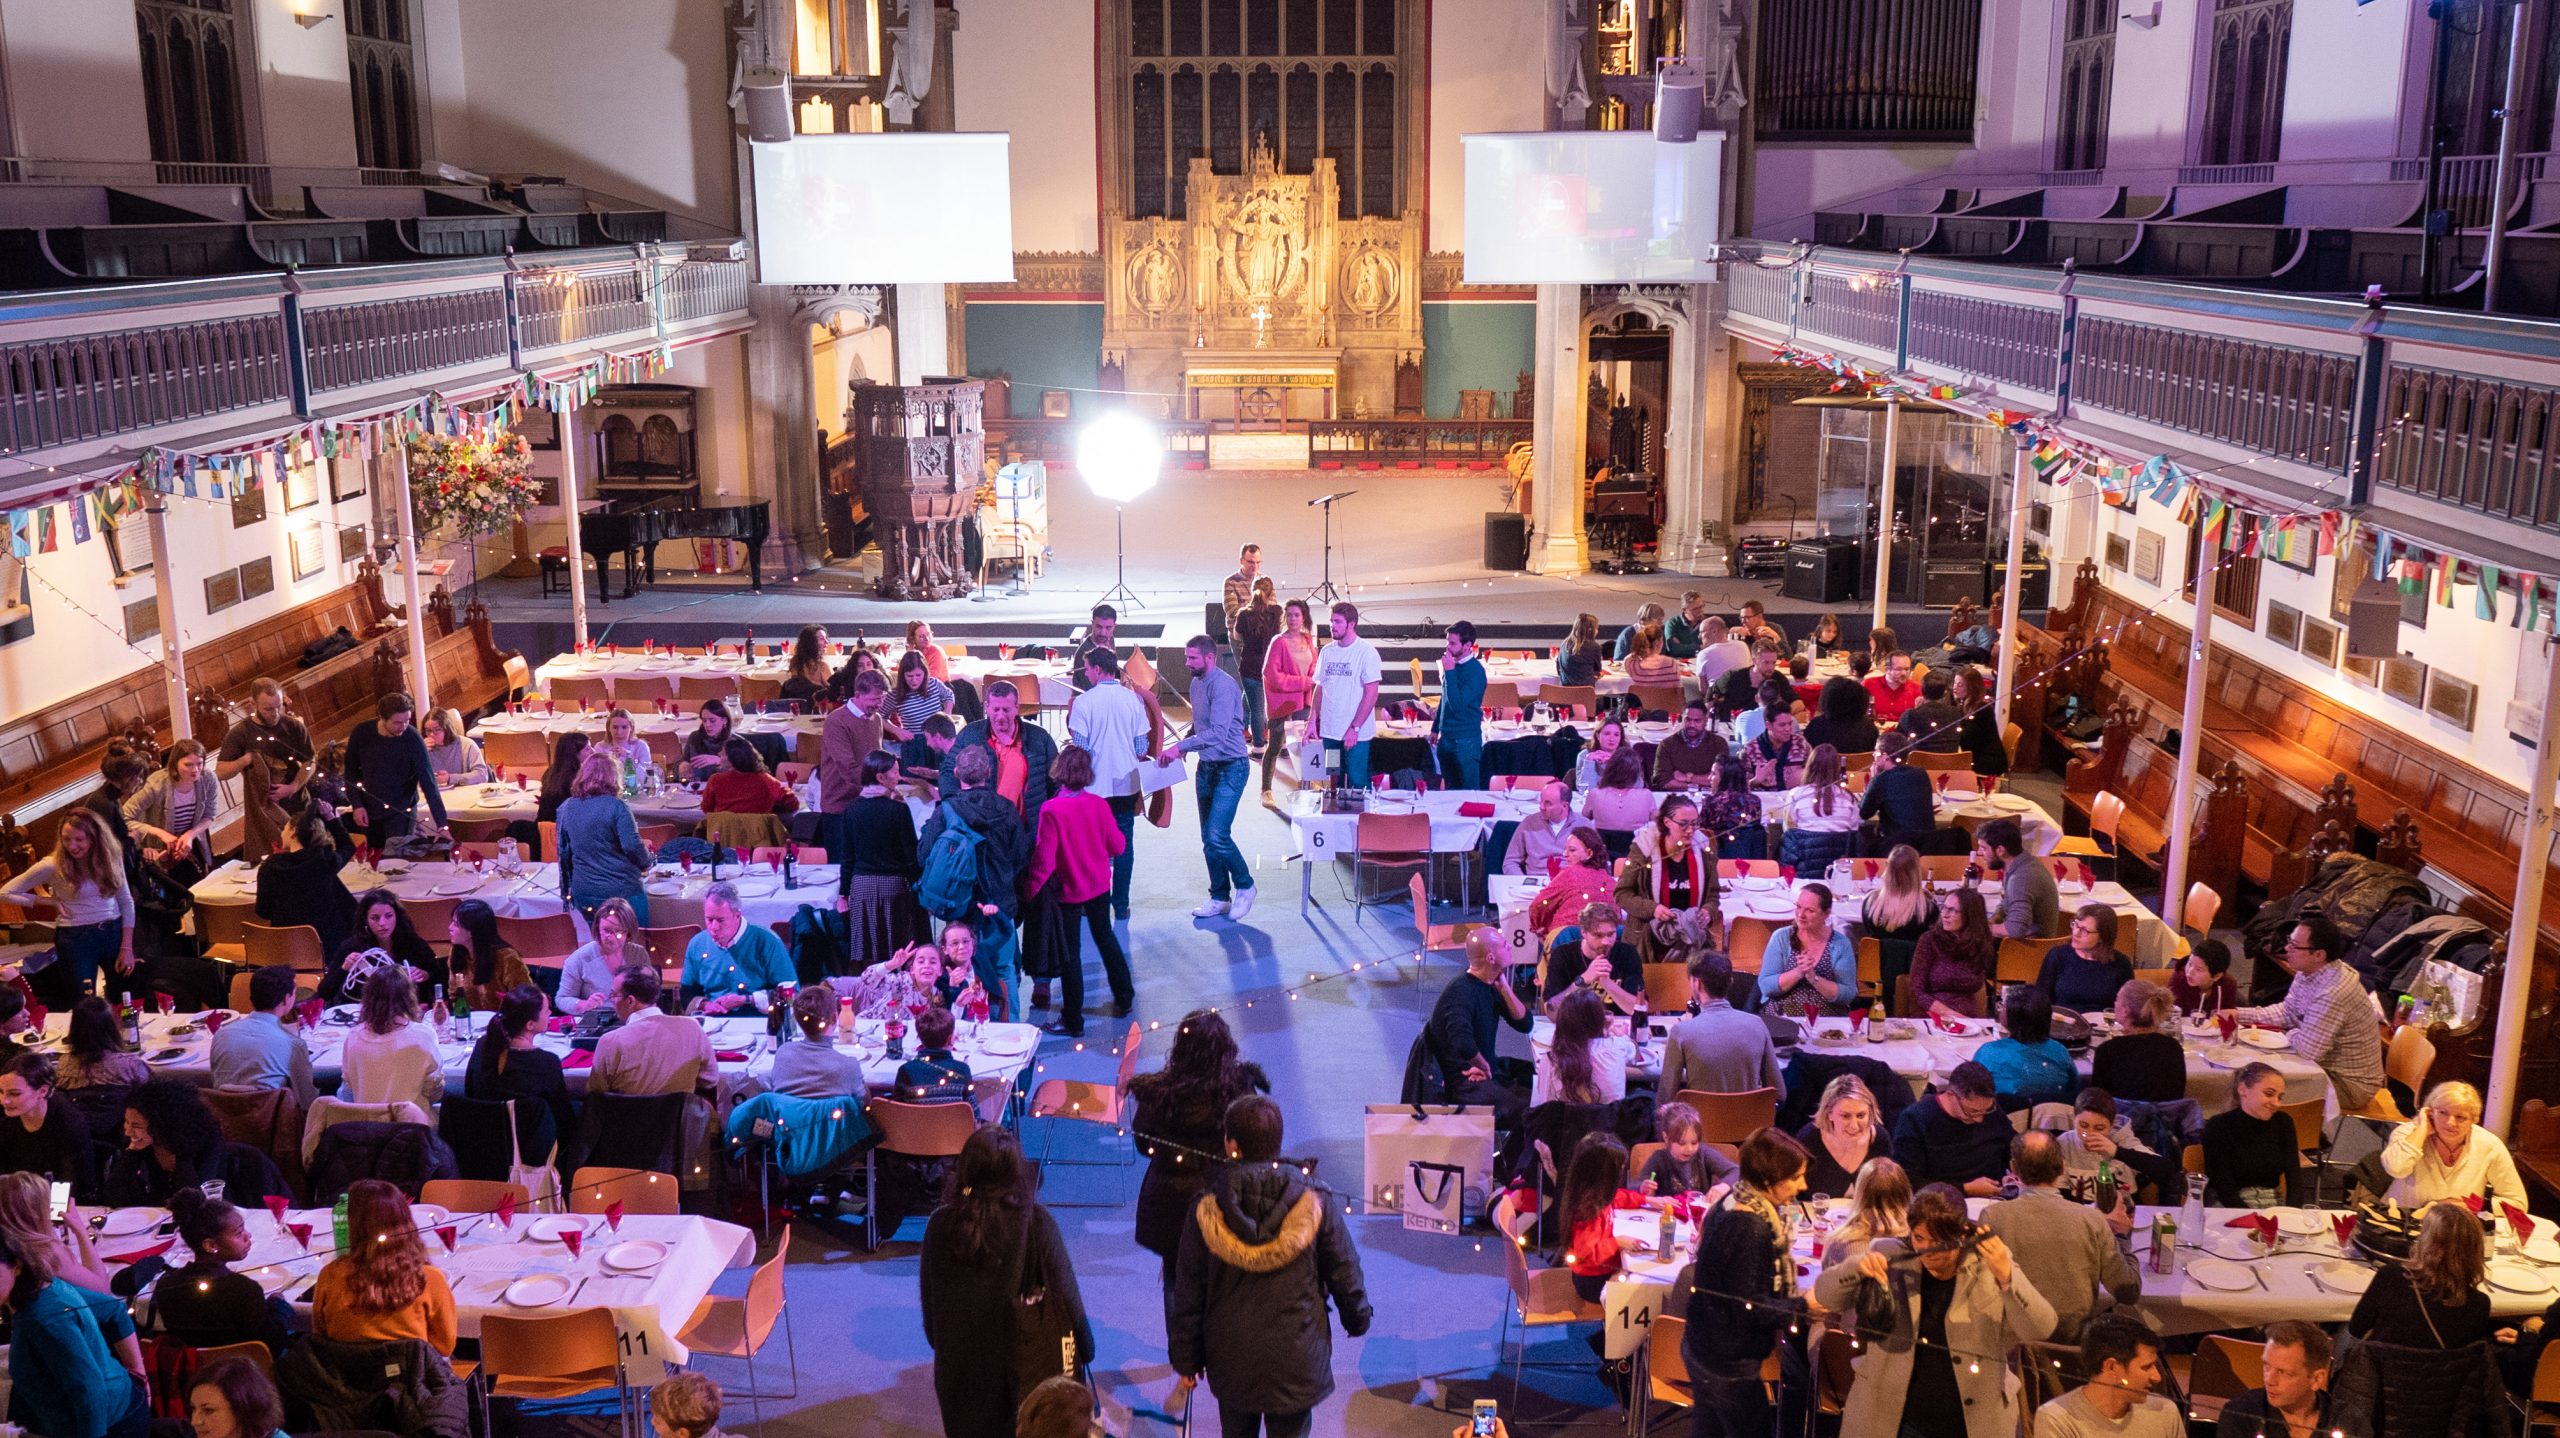 Visual aid: Aerial view of a food event in a church